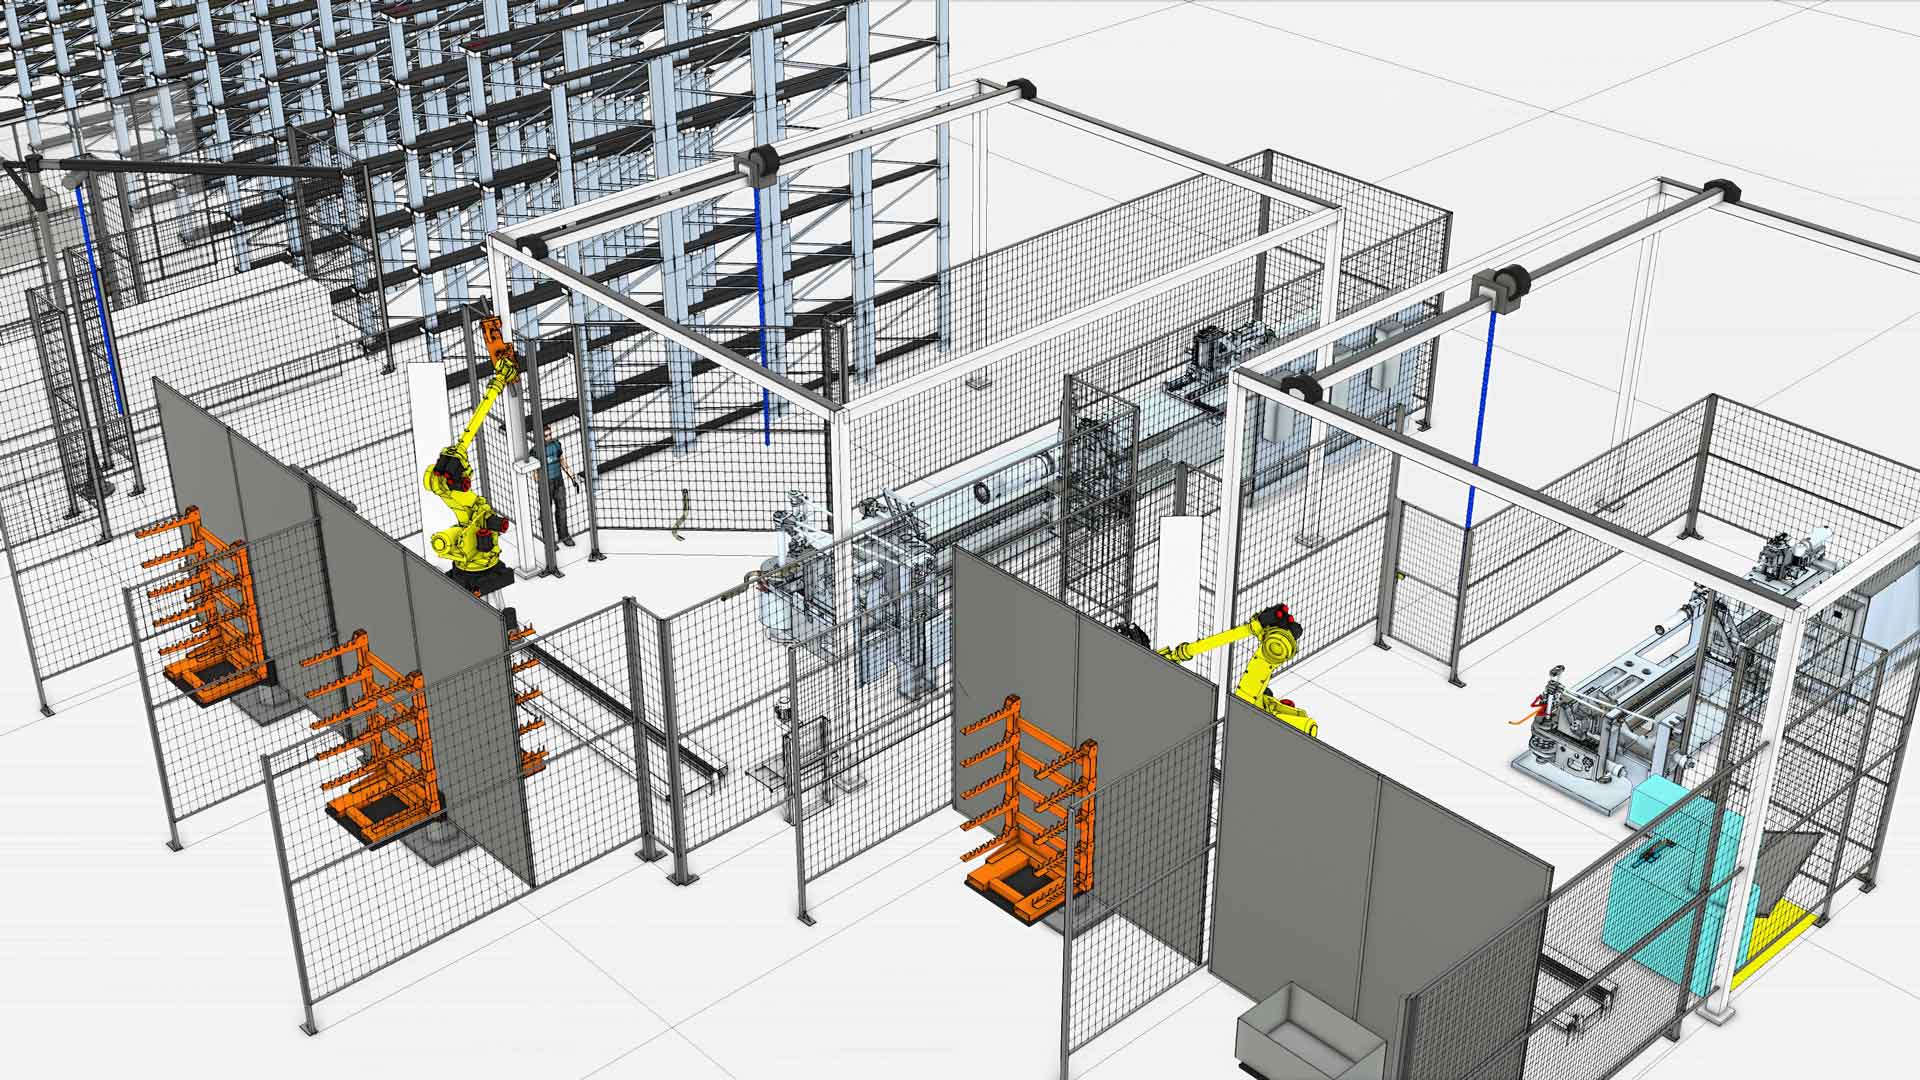 A Visual Components simulation of an AGCO factory